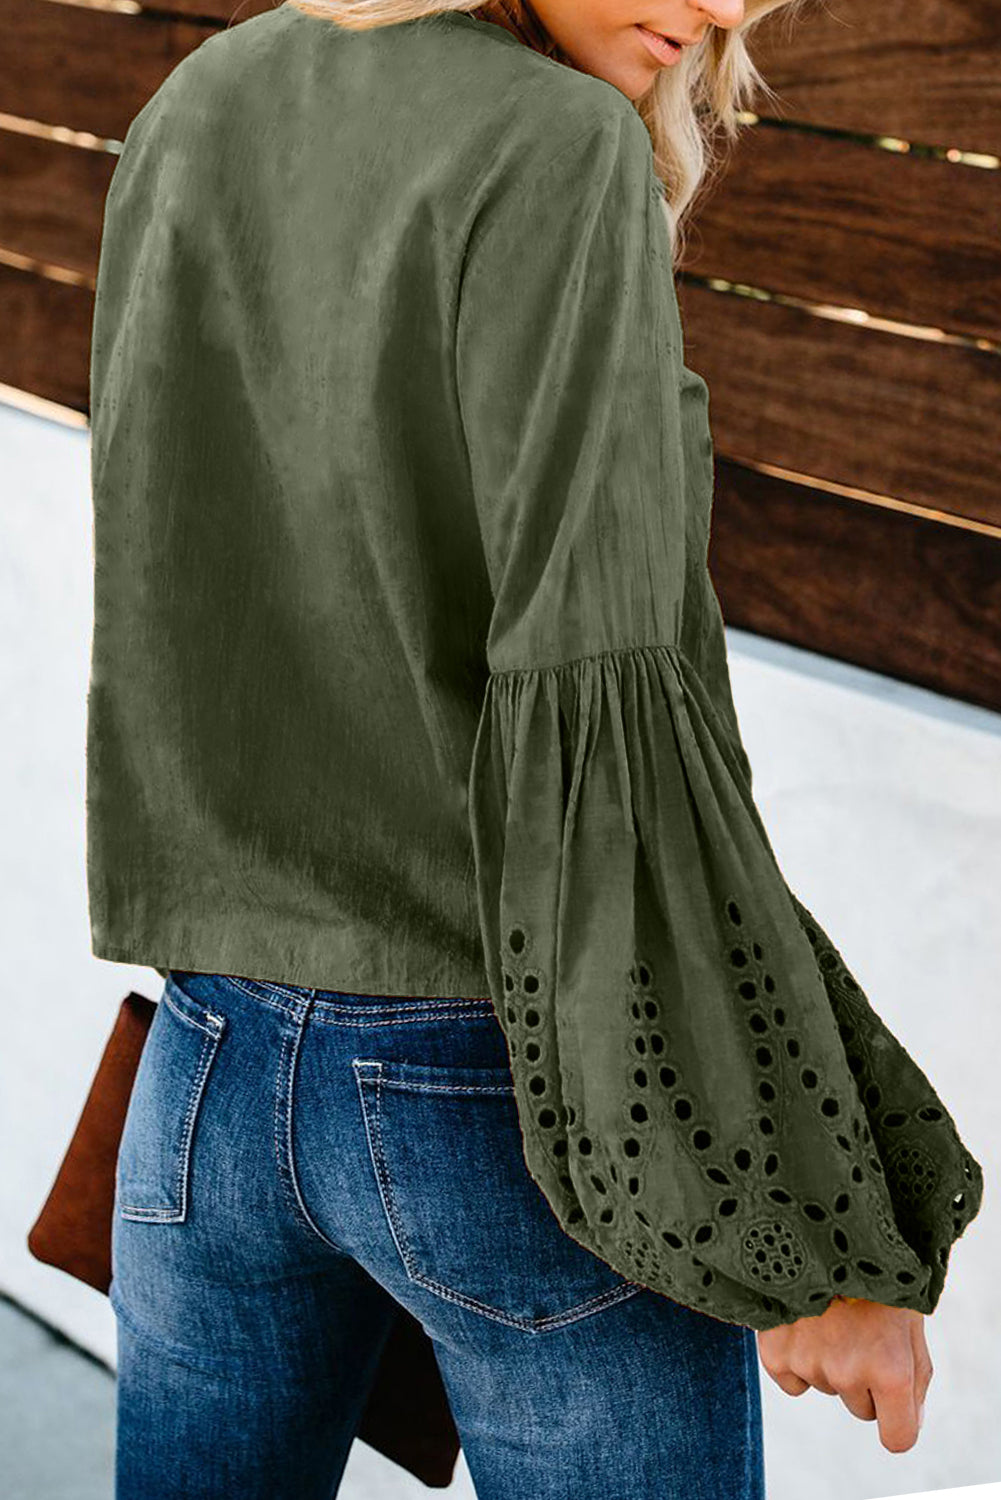 Green Women's Casual Autumn Balloon Sleeve Tie Top V Neck Blouse Loose Shirts LC252264-9